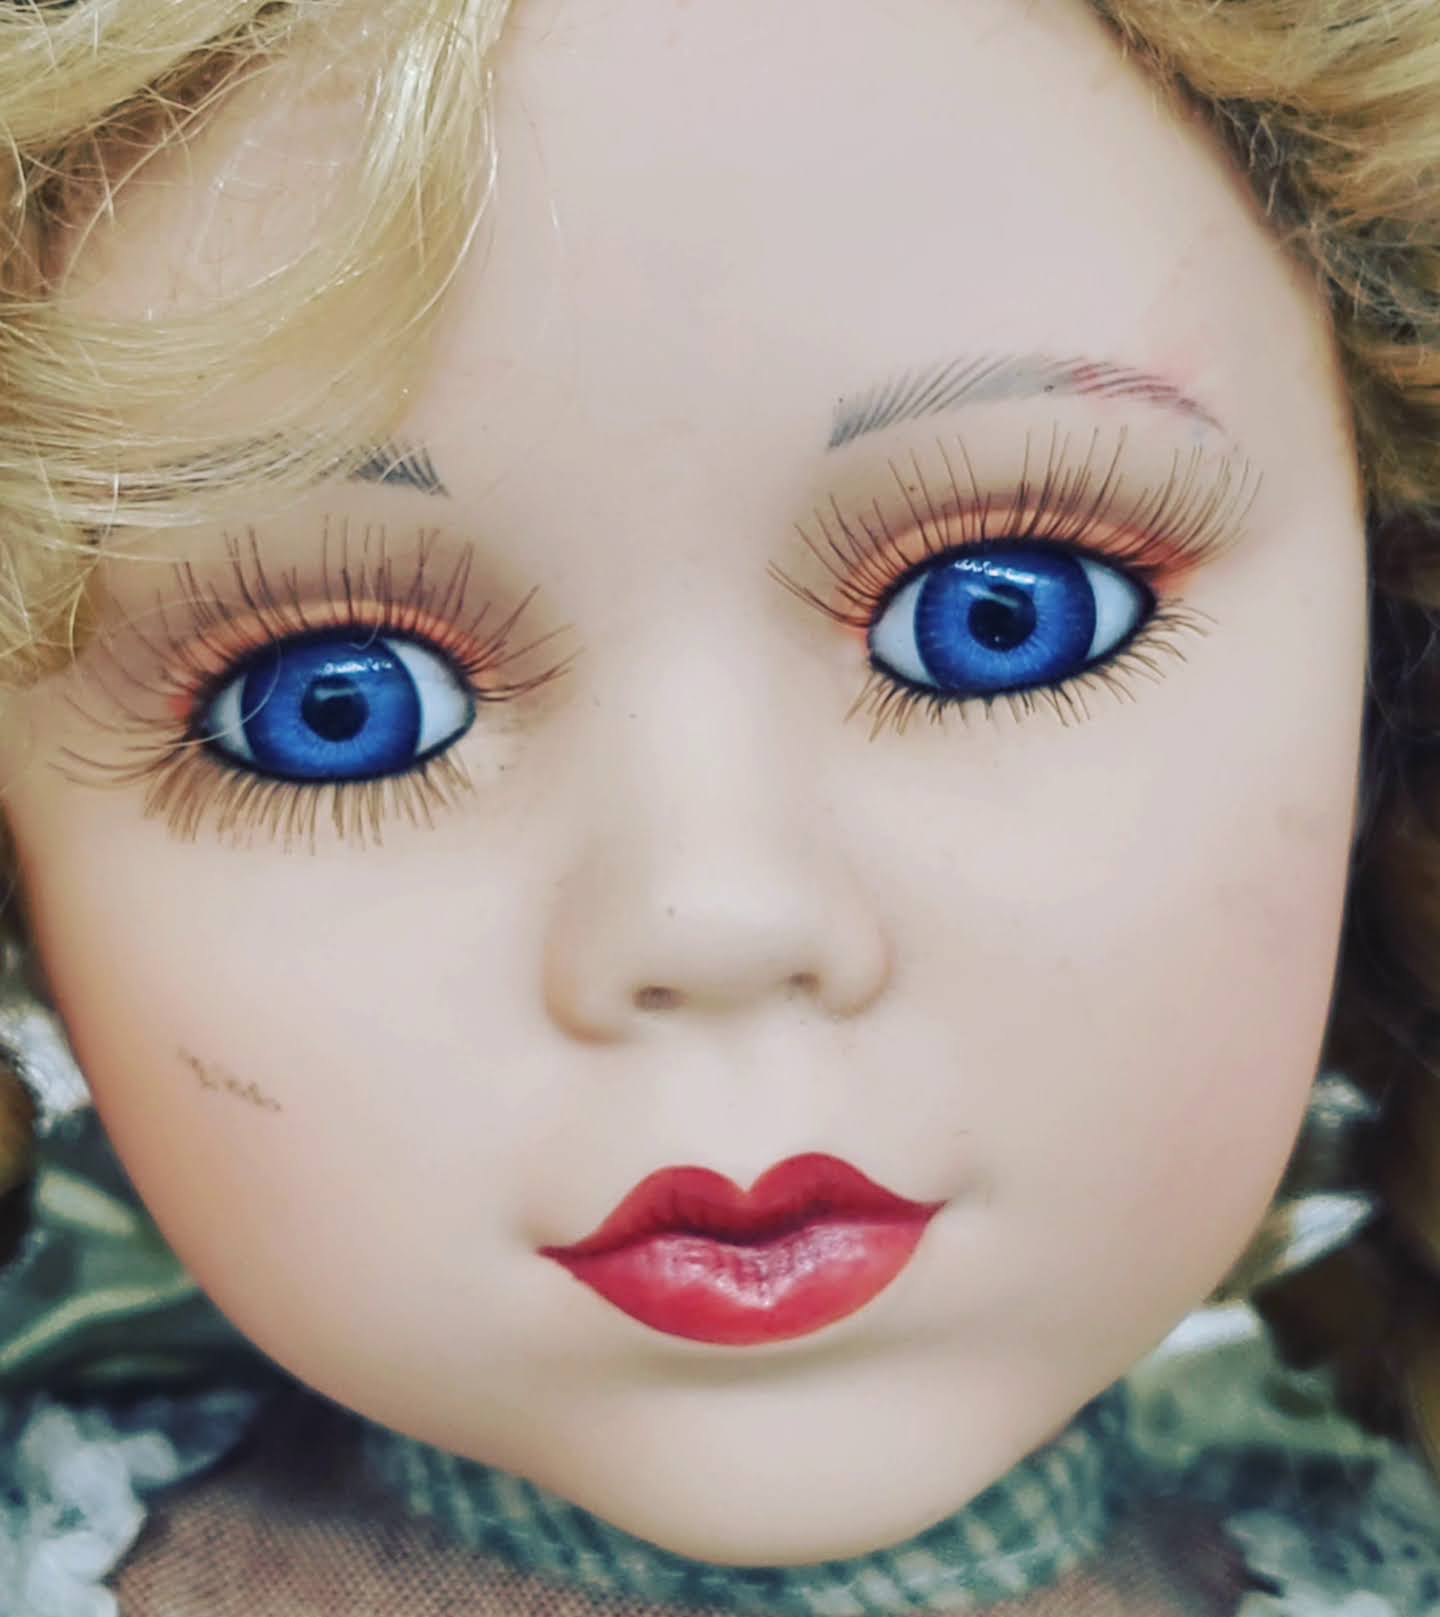 Reserved Molasses 6/7 Charlotte Haunted Doll ~ 21" Porcelain Vessel ~ Paranormal ~ Older Than She Looks ~ Very Active ~ Touchy Feely ~ *Bedroom Spirit*